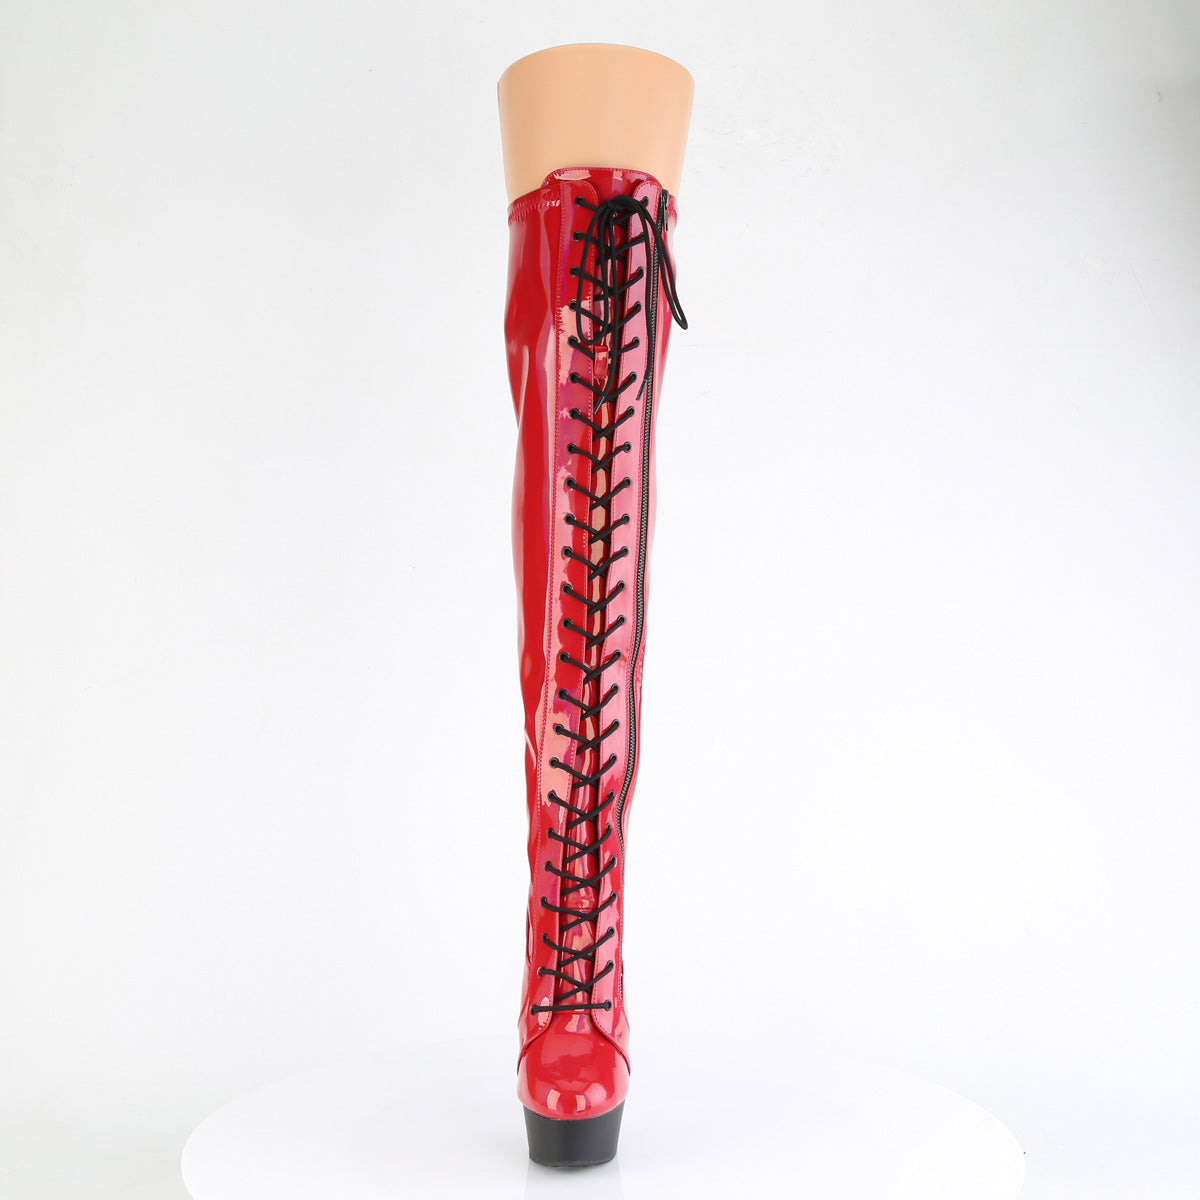 6 Inch Heel DELIGHT-3029 Red Stretch Holo